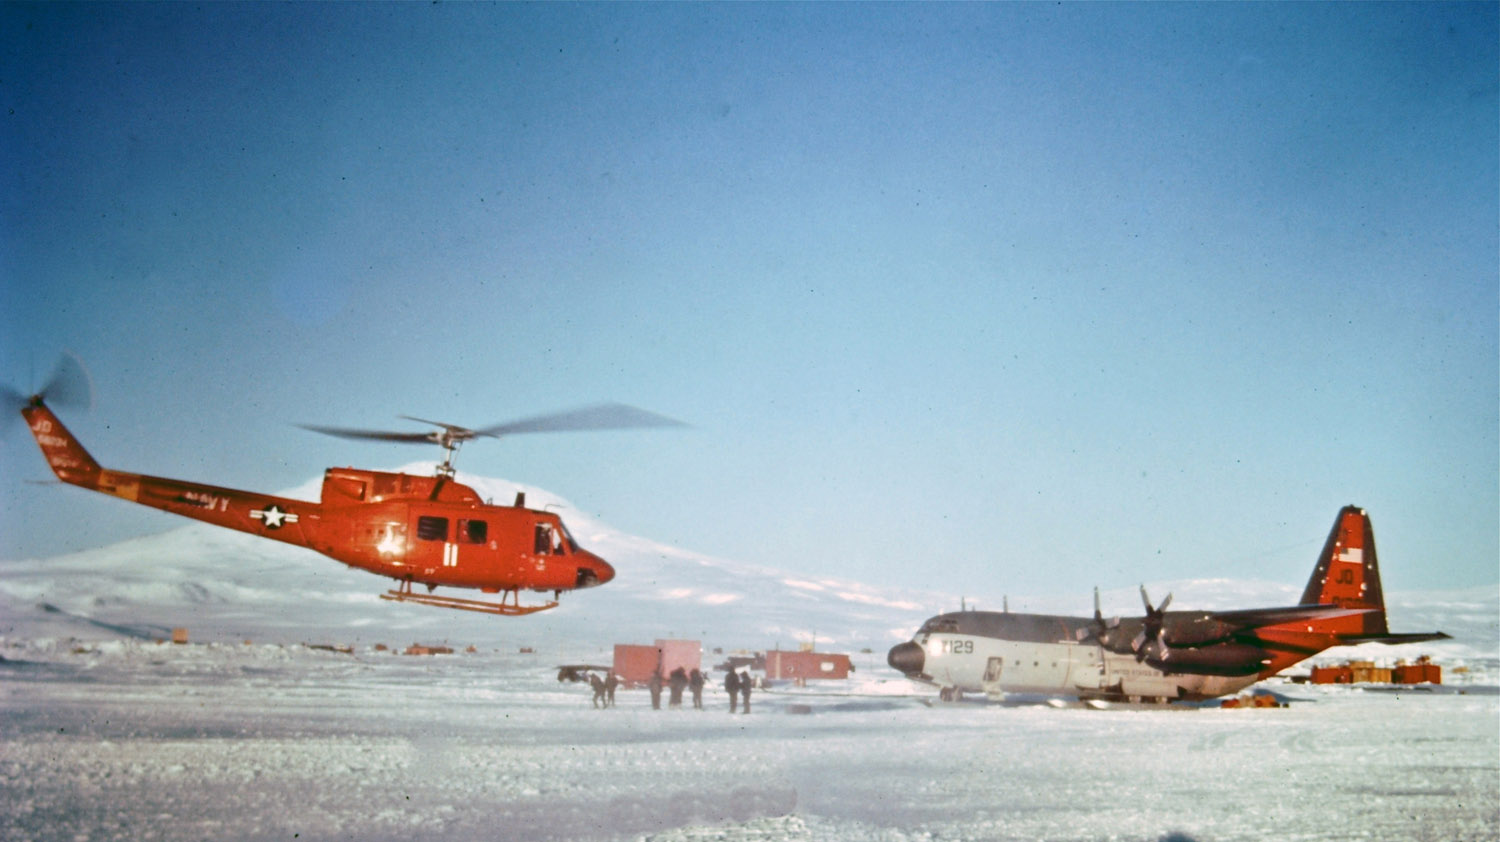 Antarctica Aircraft - C-130 Hercules and Helicopter